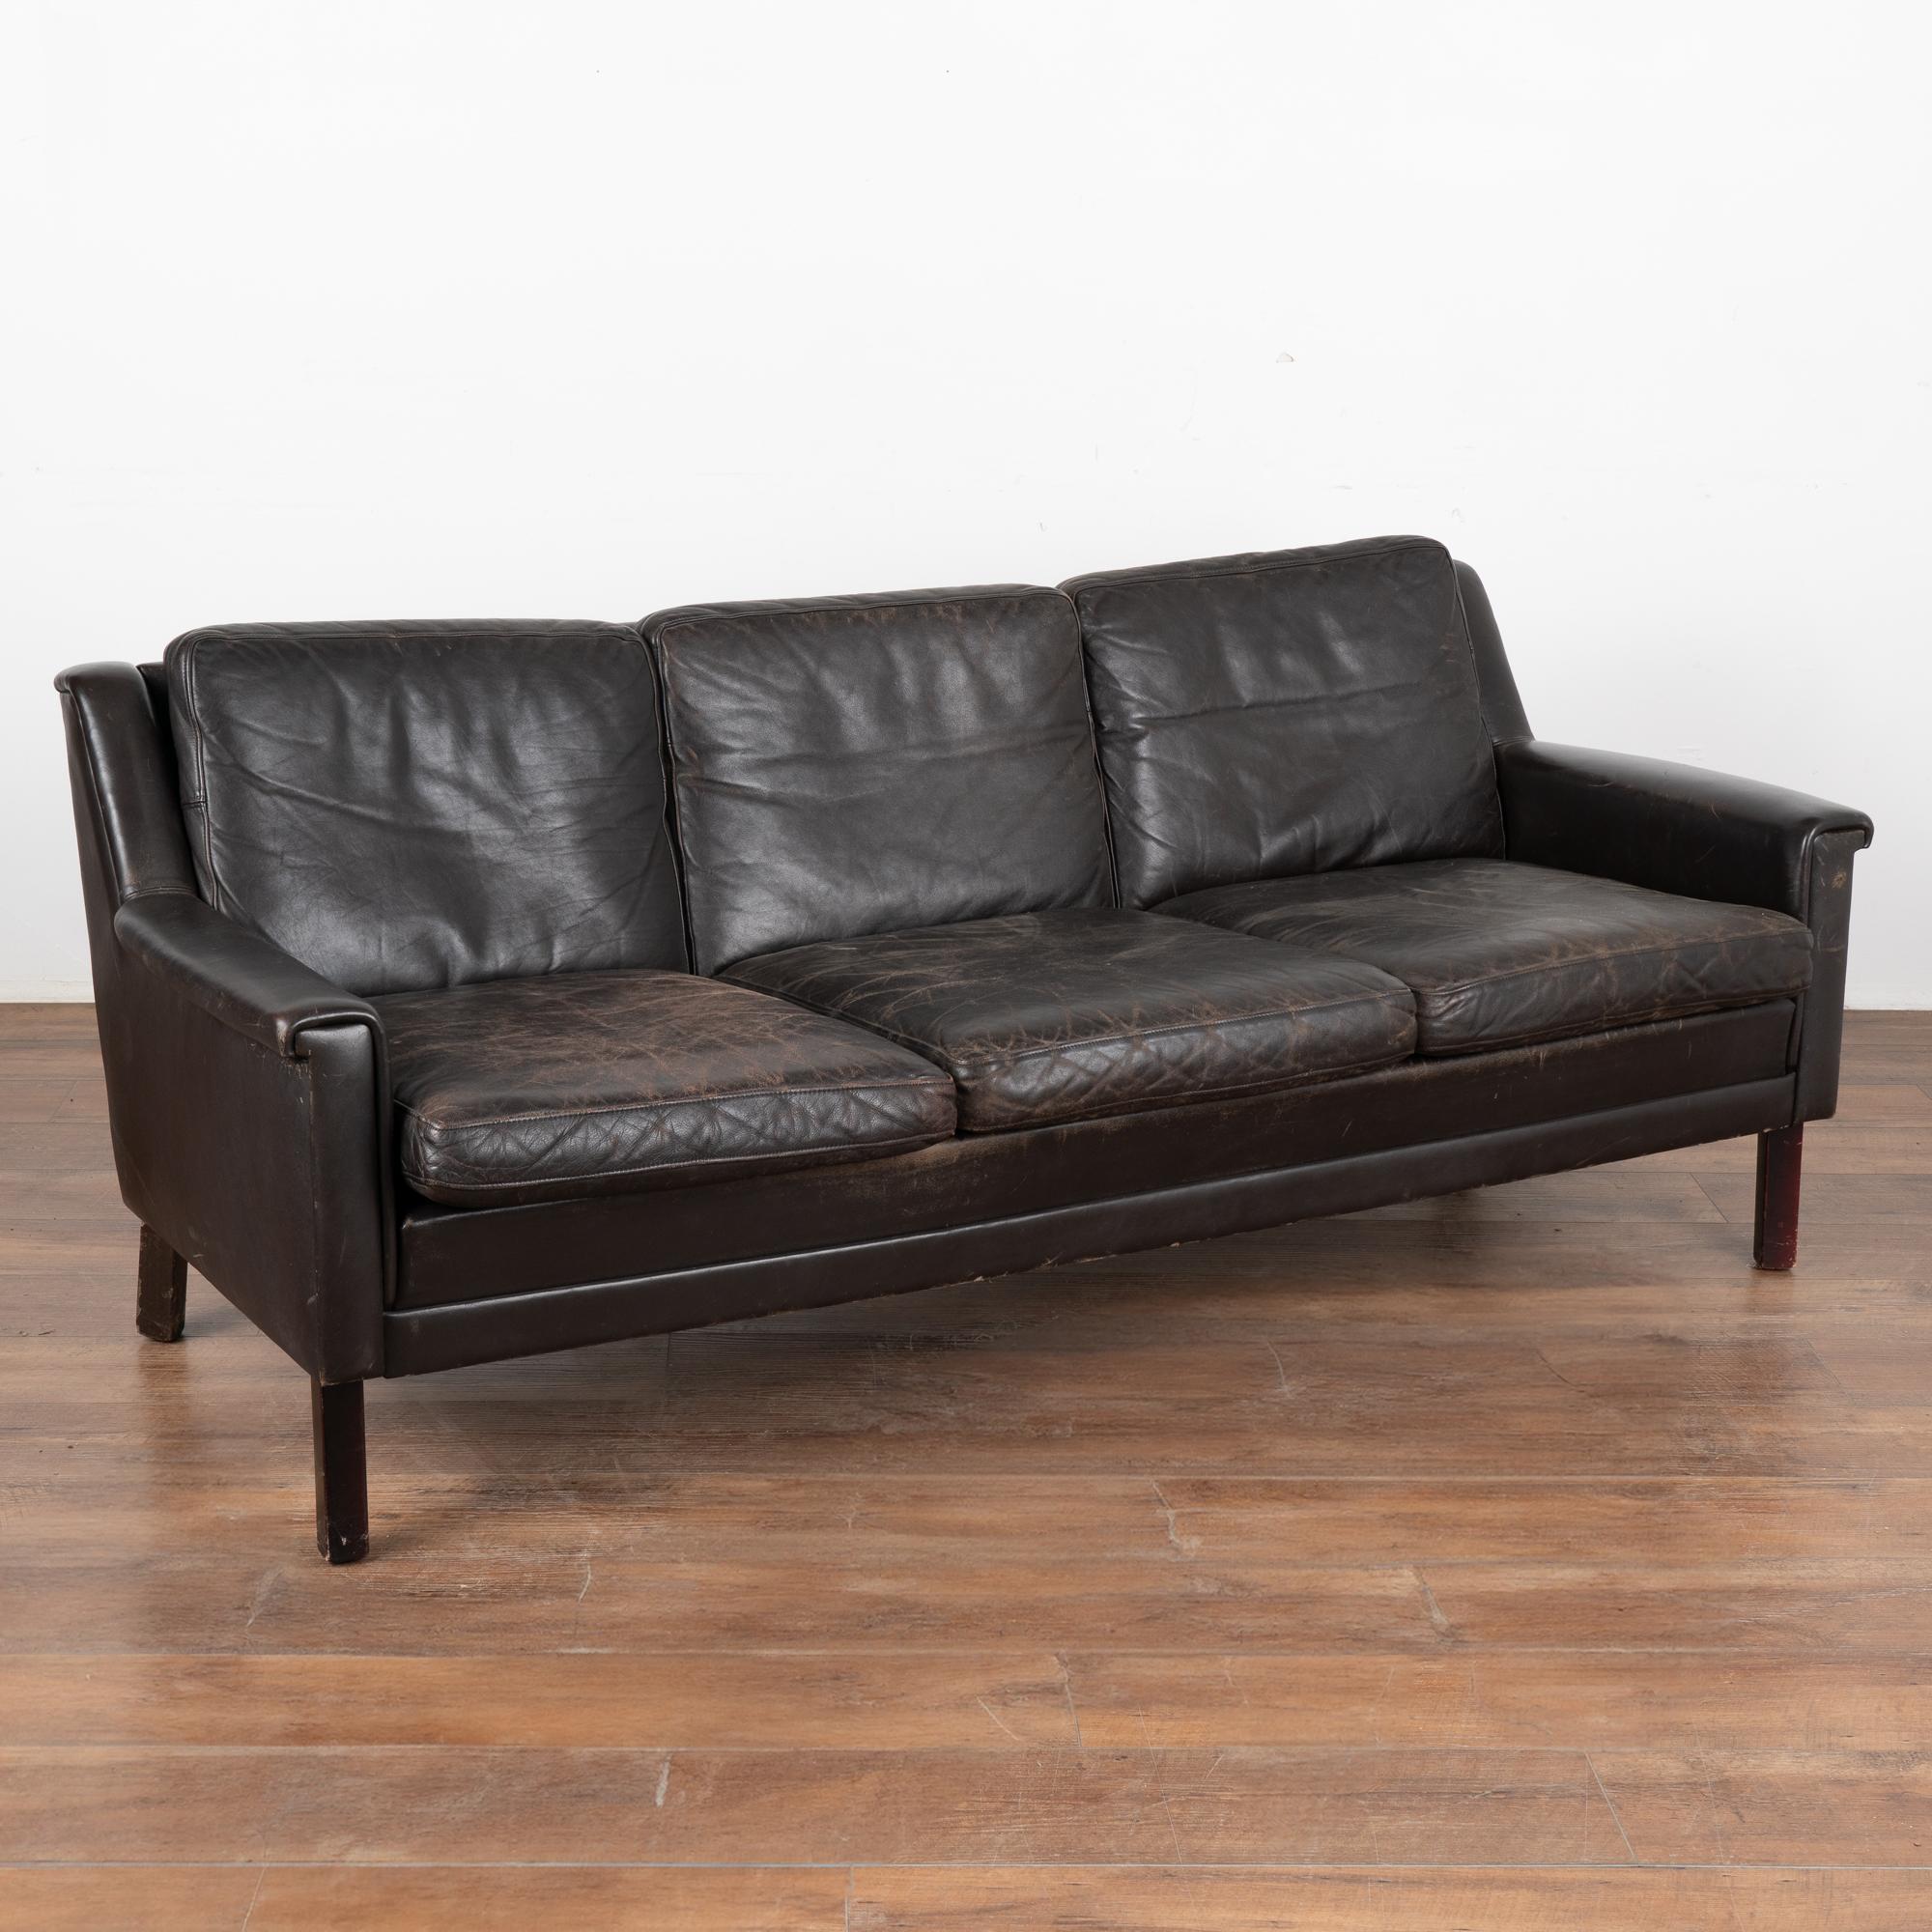 Mid-century modern dark chocolate brown leather three-seat sofa with removable cushions and hard wood frame.
The years of use are revealed in the aged patina of the leather, including impressions, scuffs/scratches, some discoloration, stains on